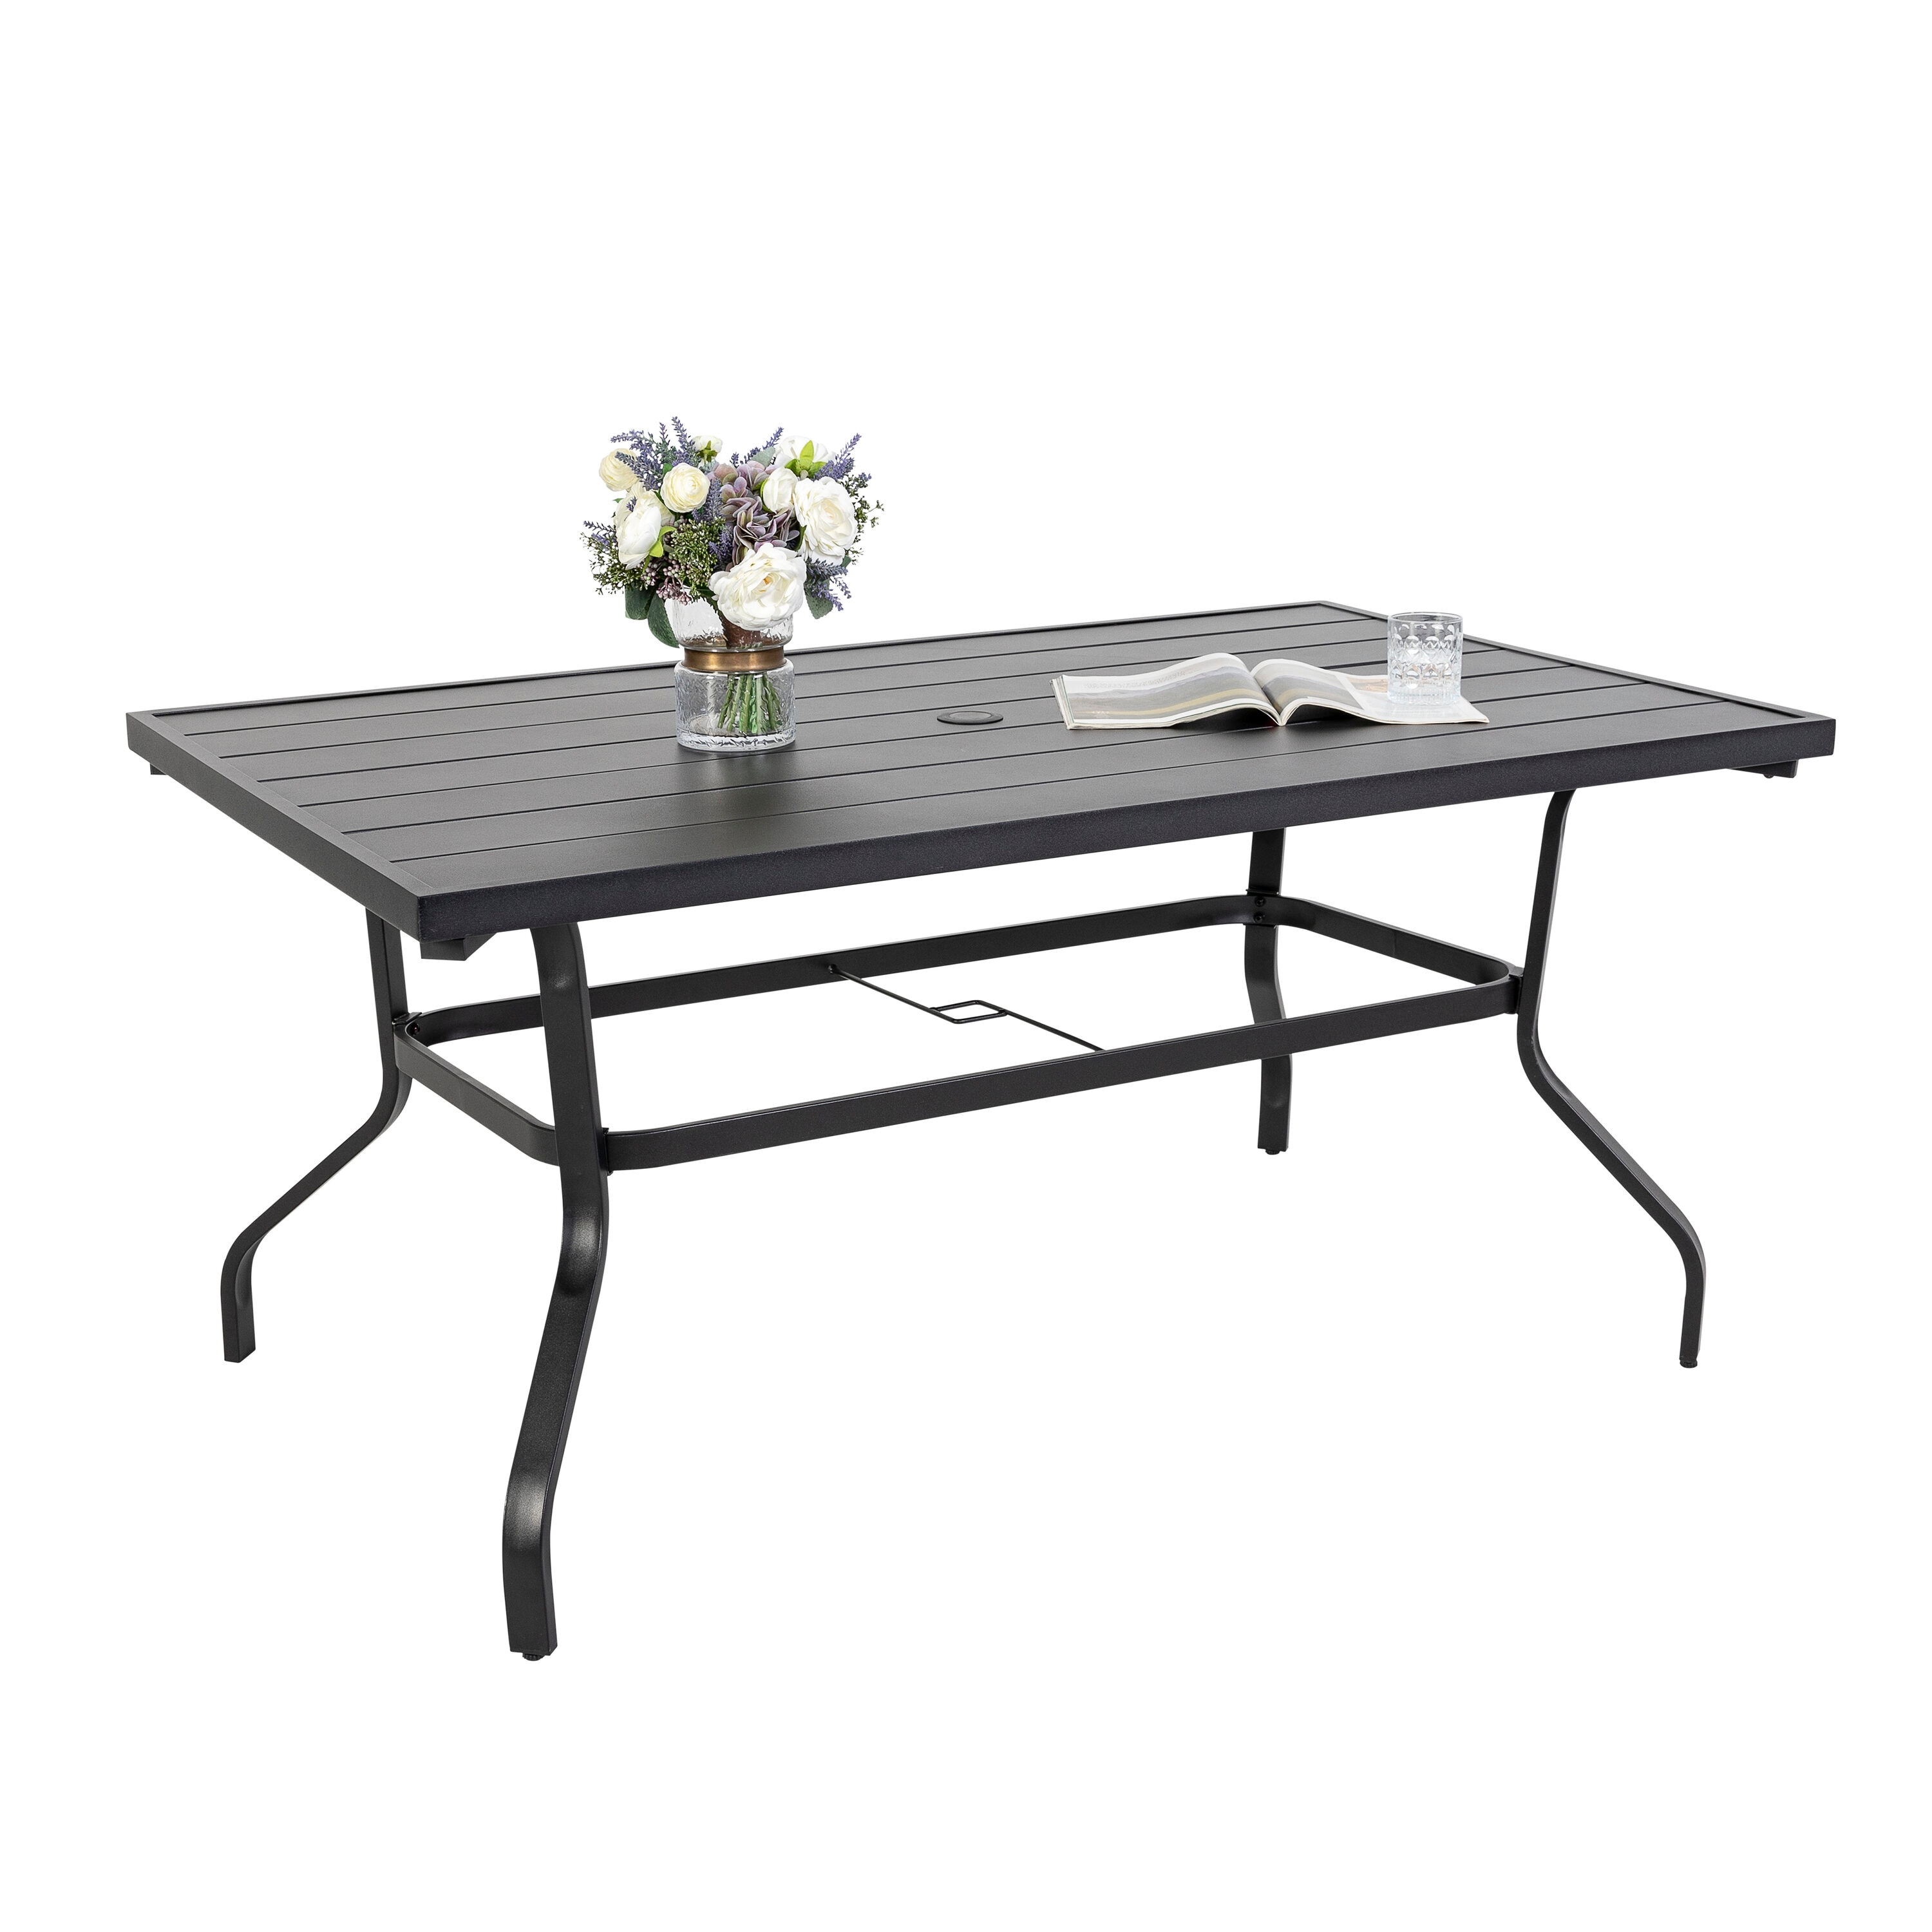 Iron Patio Tables At Lowes.Com